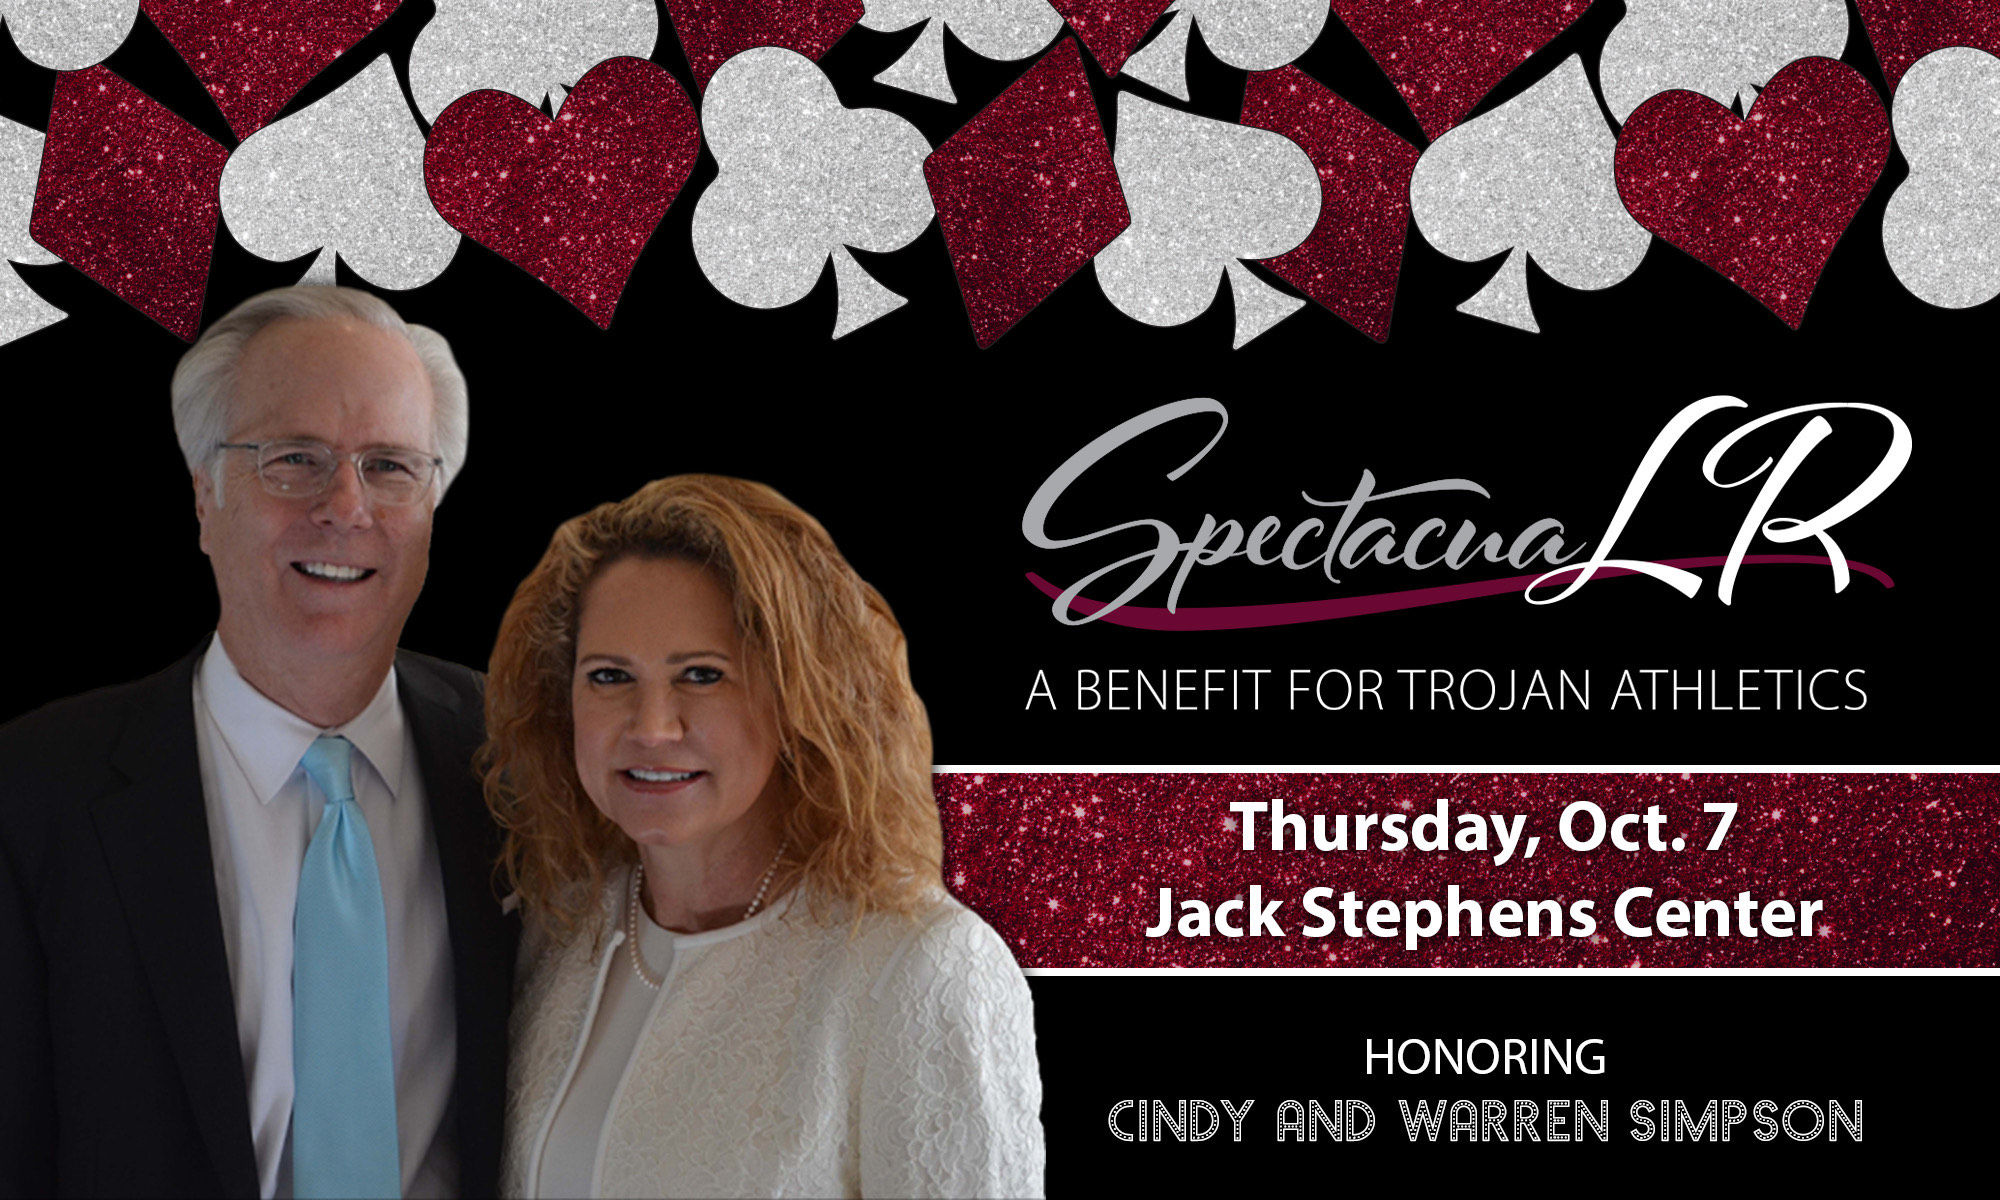 Little Rock Athletics is excited to announce Warren and Cindy Simpson as the honorees for the 13th annual SpectacUALR event benefiting Little Rock Athletics on Thursday, Oct. 7, at the Jack Stephens Center on the UA Little Rock campus.